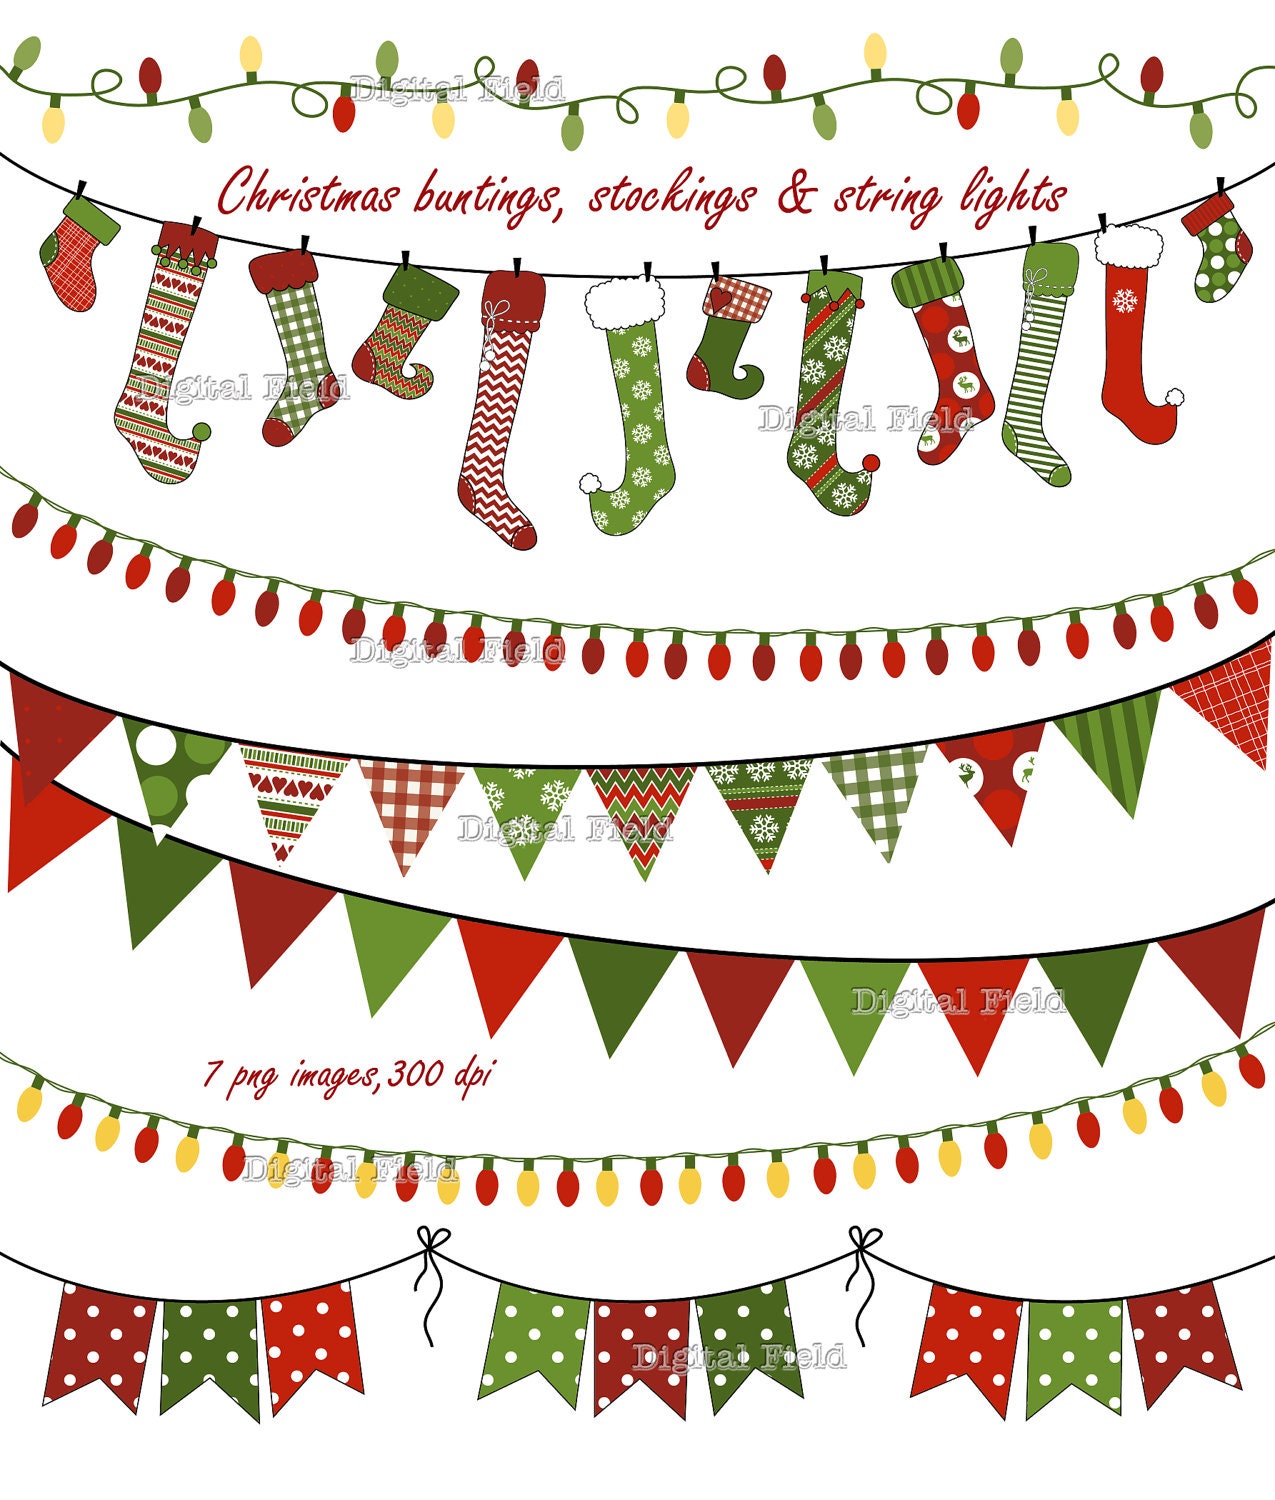 free clipart for holiday parties - photo #18